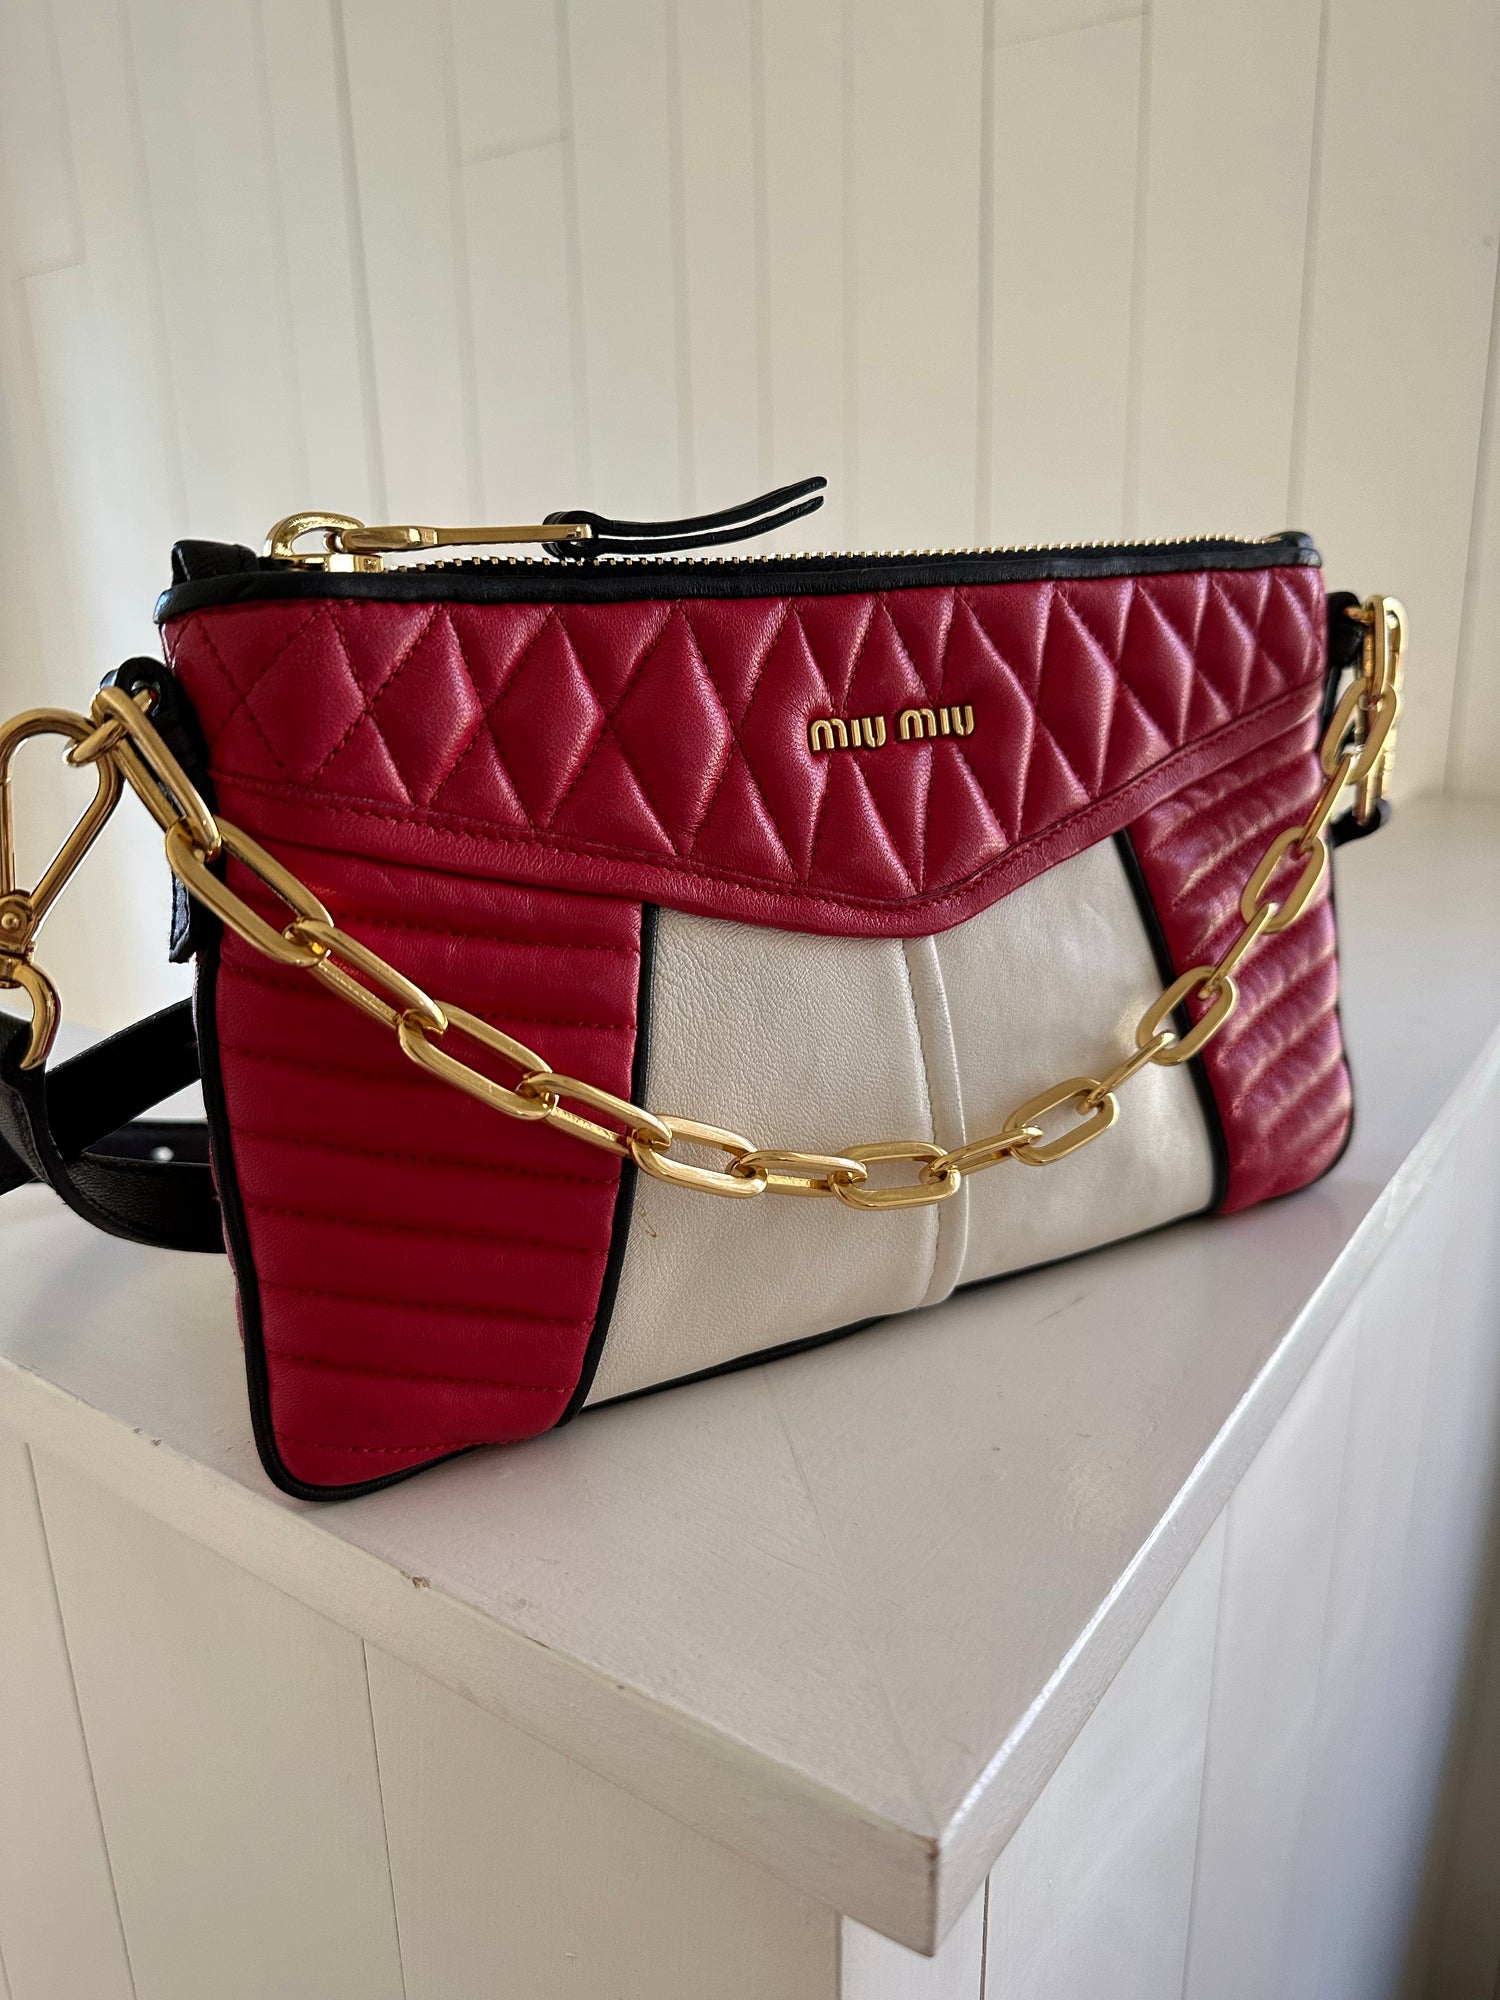 The Chain Link Leather Crossbody Red